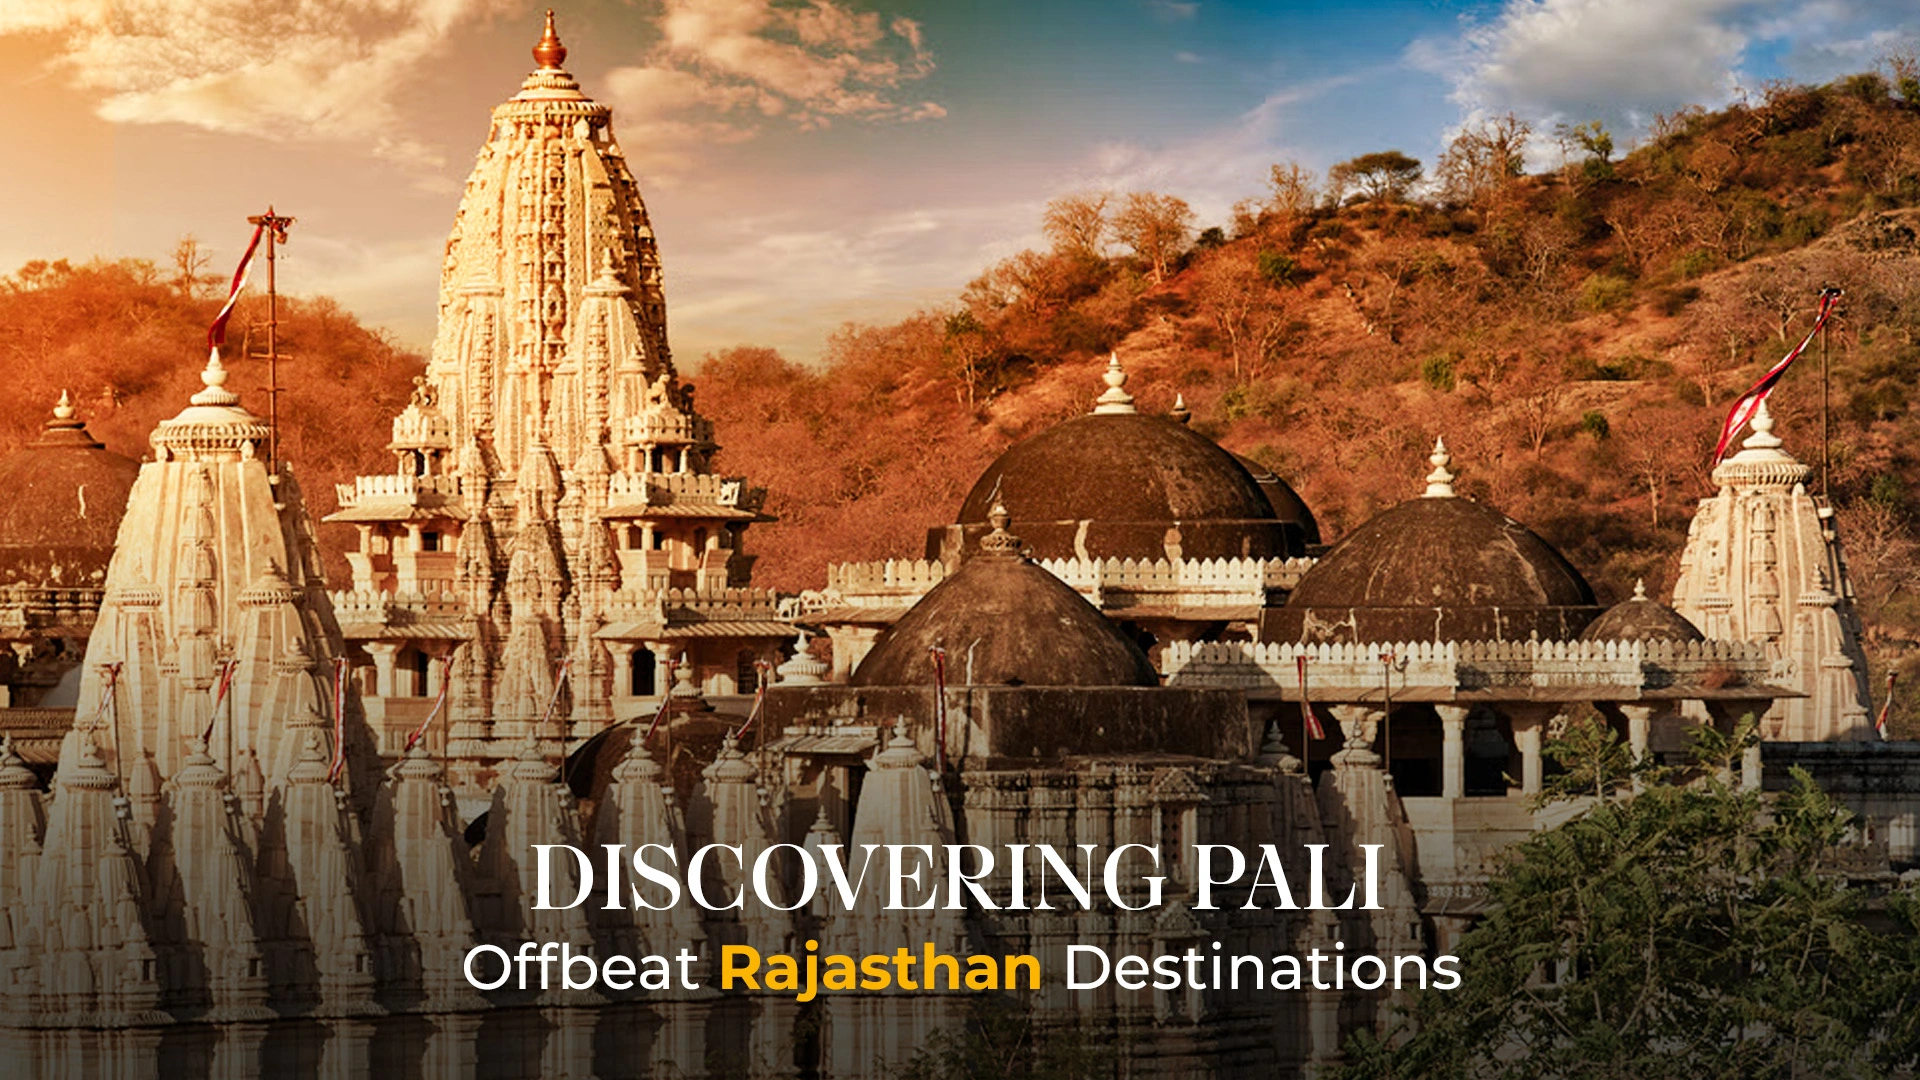 Discovering Pali: Offbeat Rajasthan Destinations